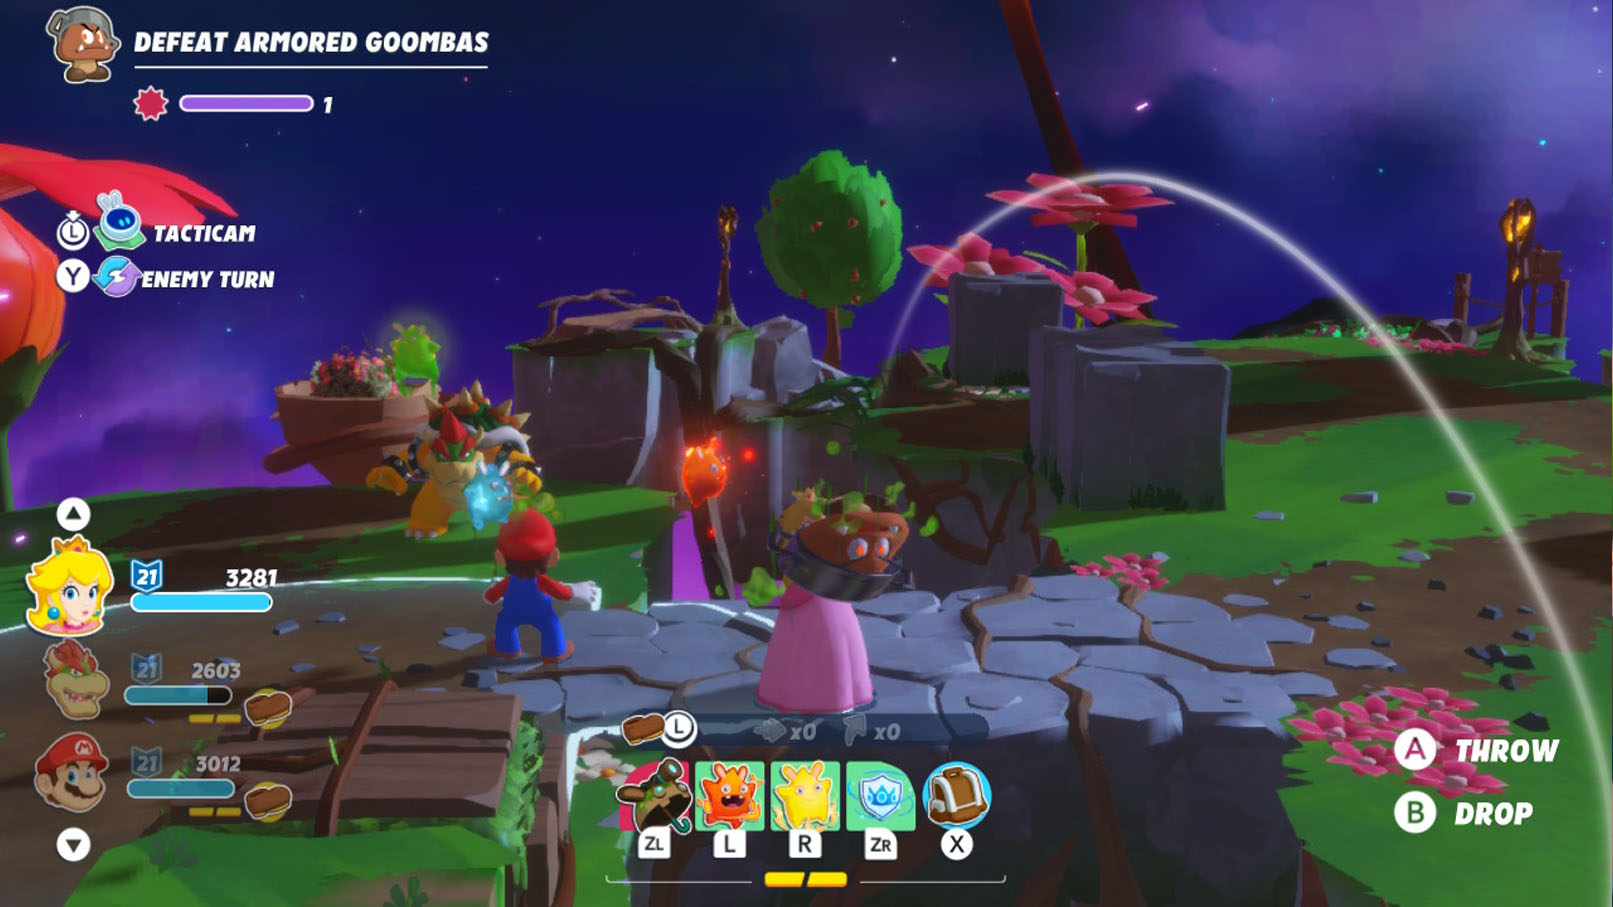 Mario + Rabbids Sparks of Hope: Peach throwing Goomba off ledge